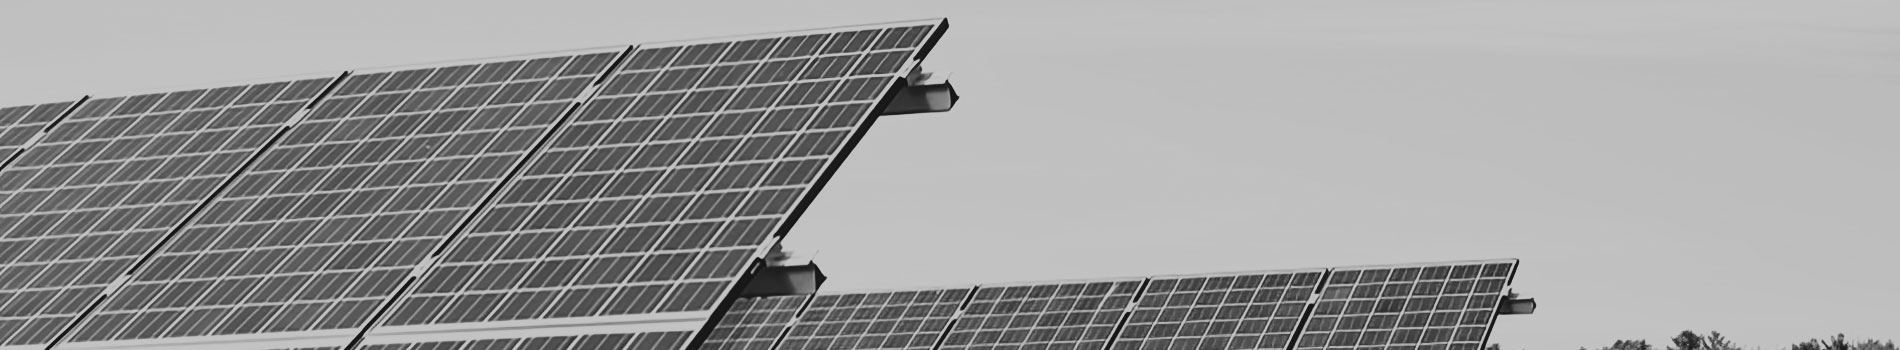 Black and white image of solar panels, where only the tops of the panels are visible against the sky